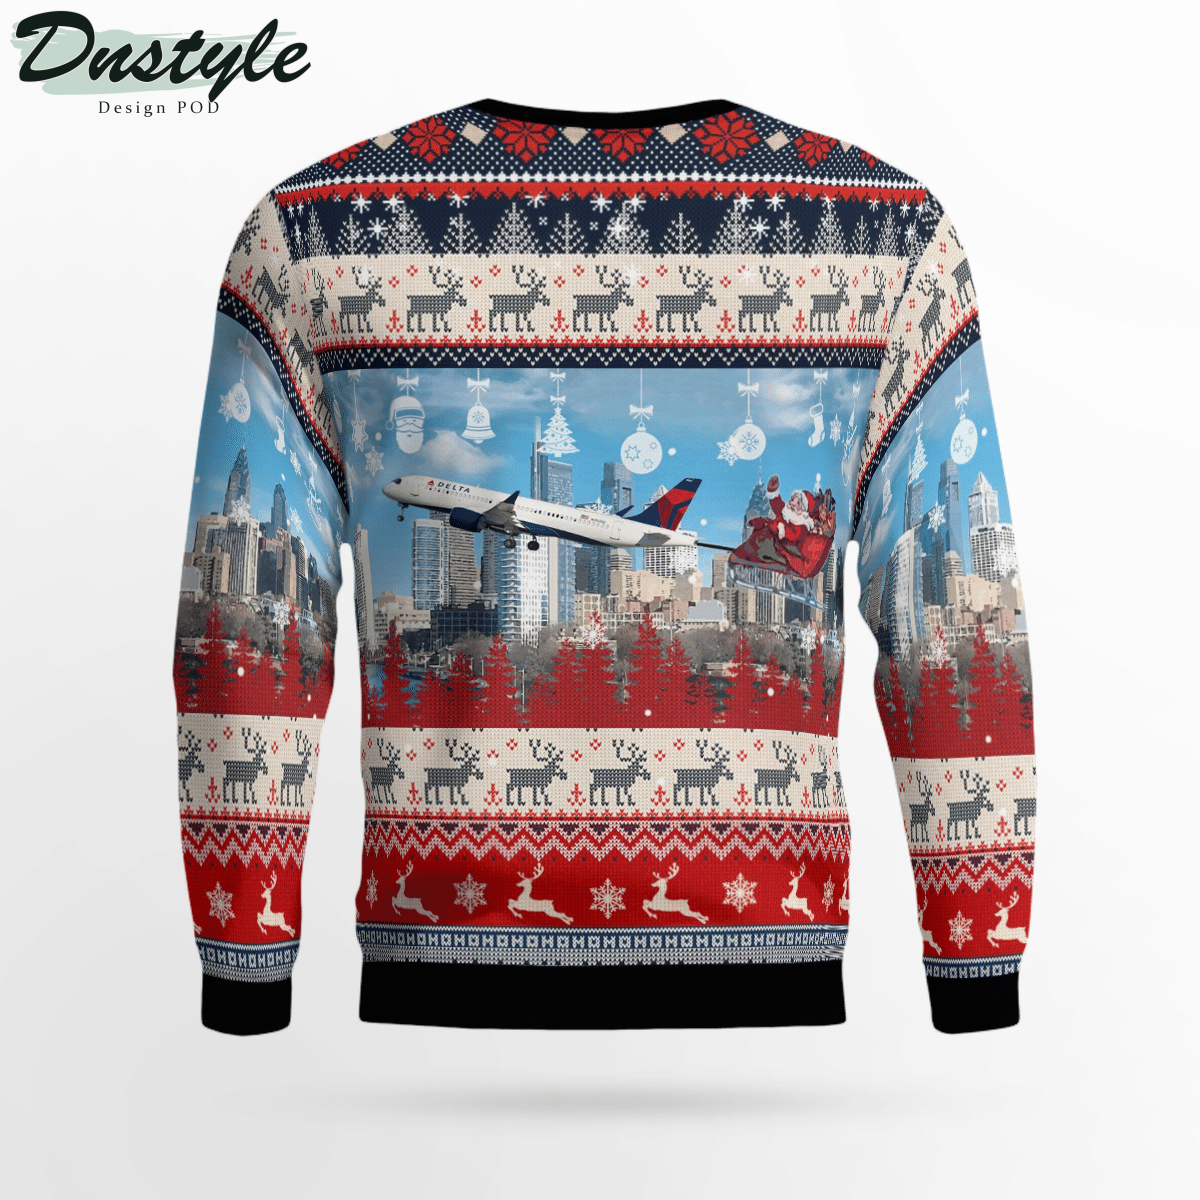 Delta Air Lines Airbus A220-300 With Santa over Philadelphia Ugly Christmas Sweater